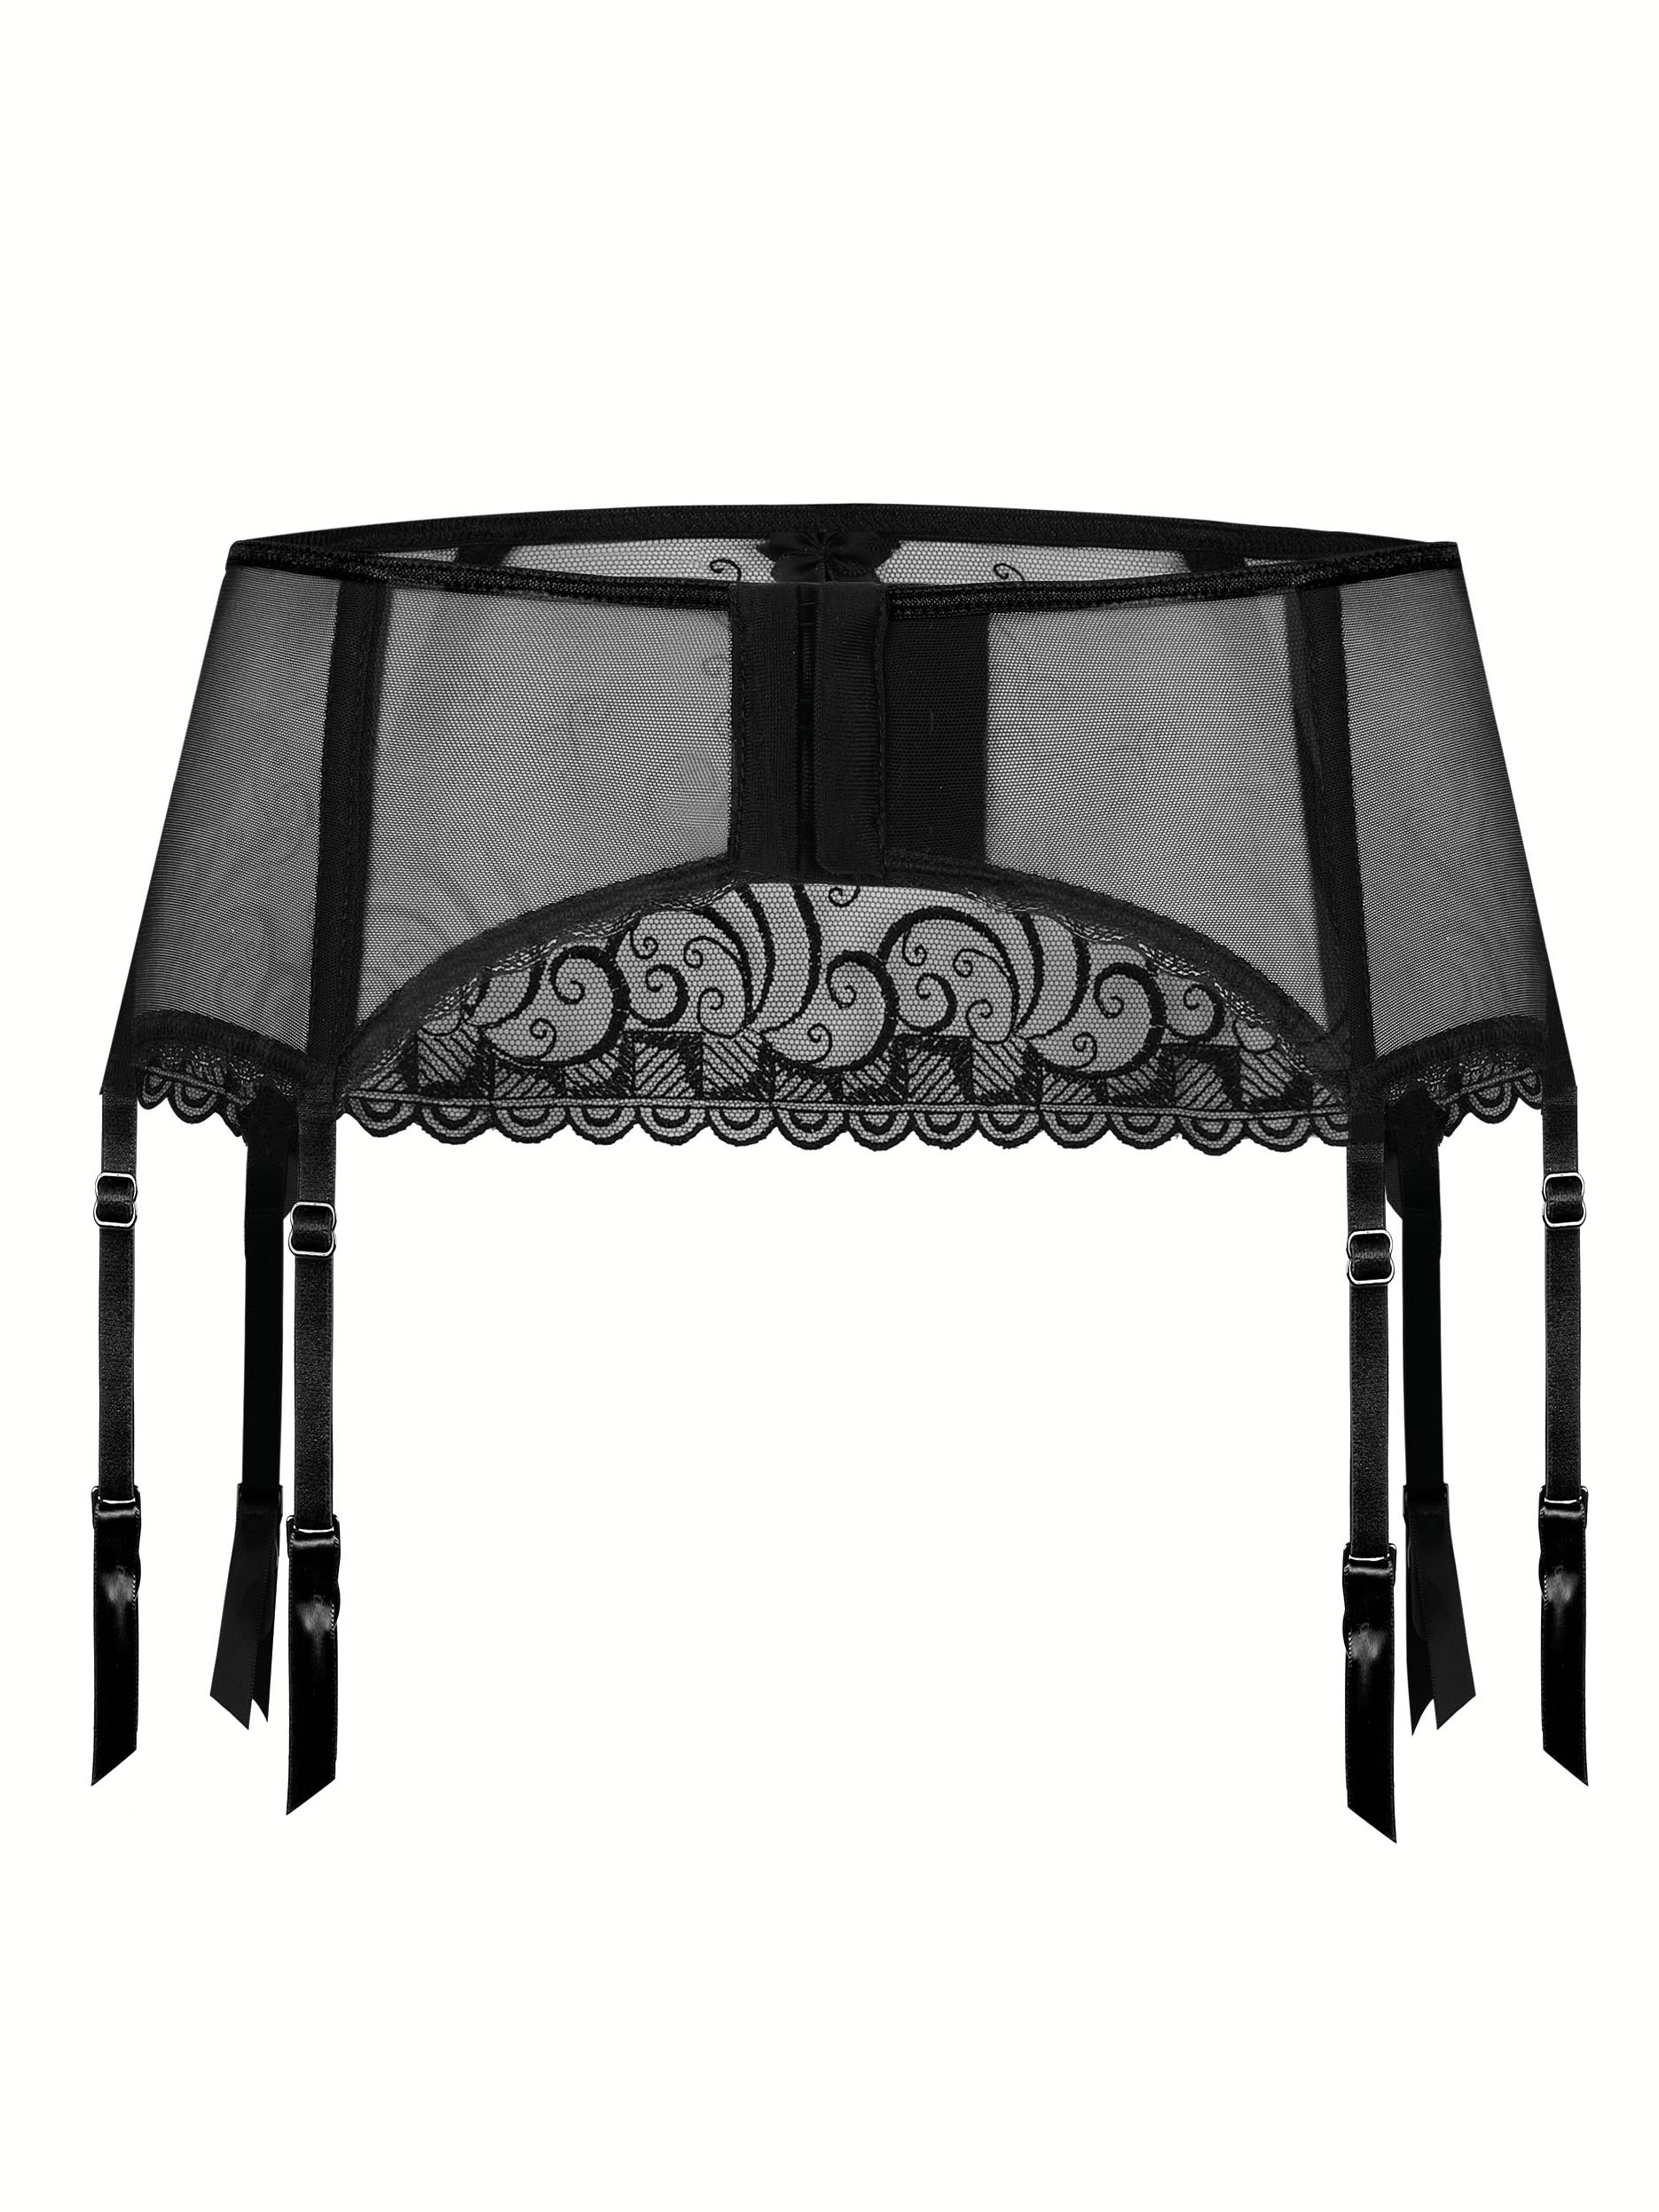 Lace garter belt with sheer tulle Roza Anuk #5